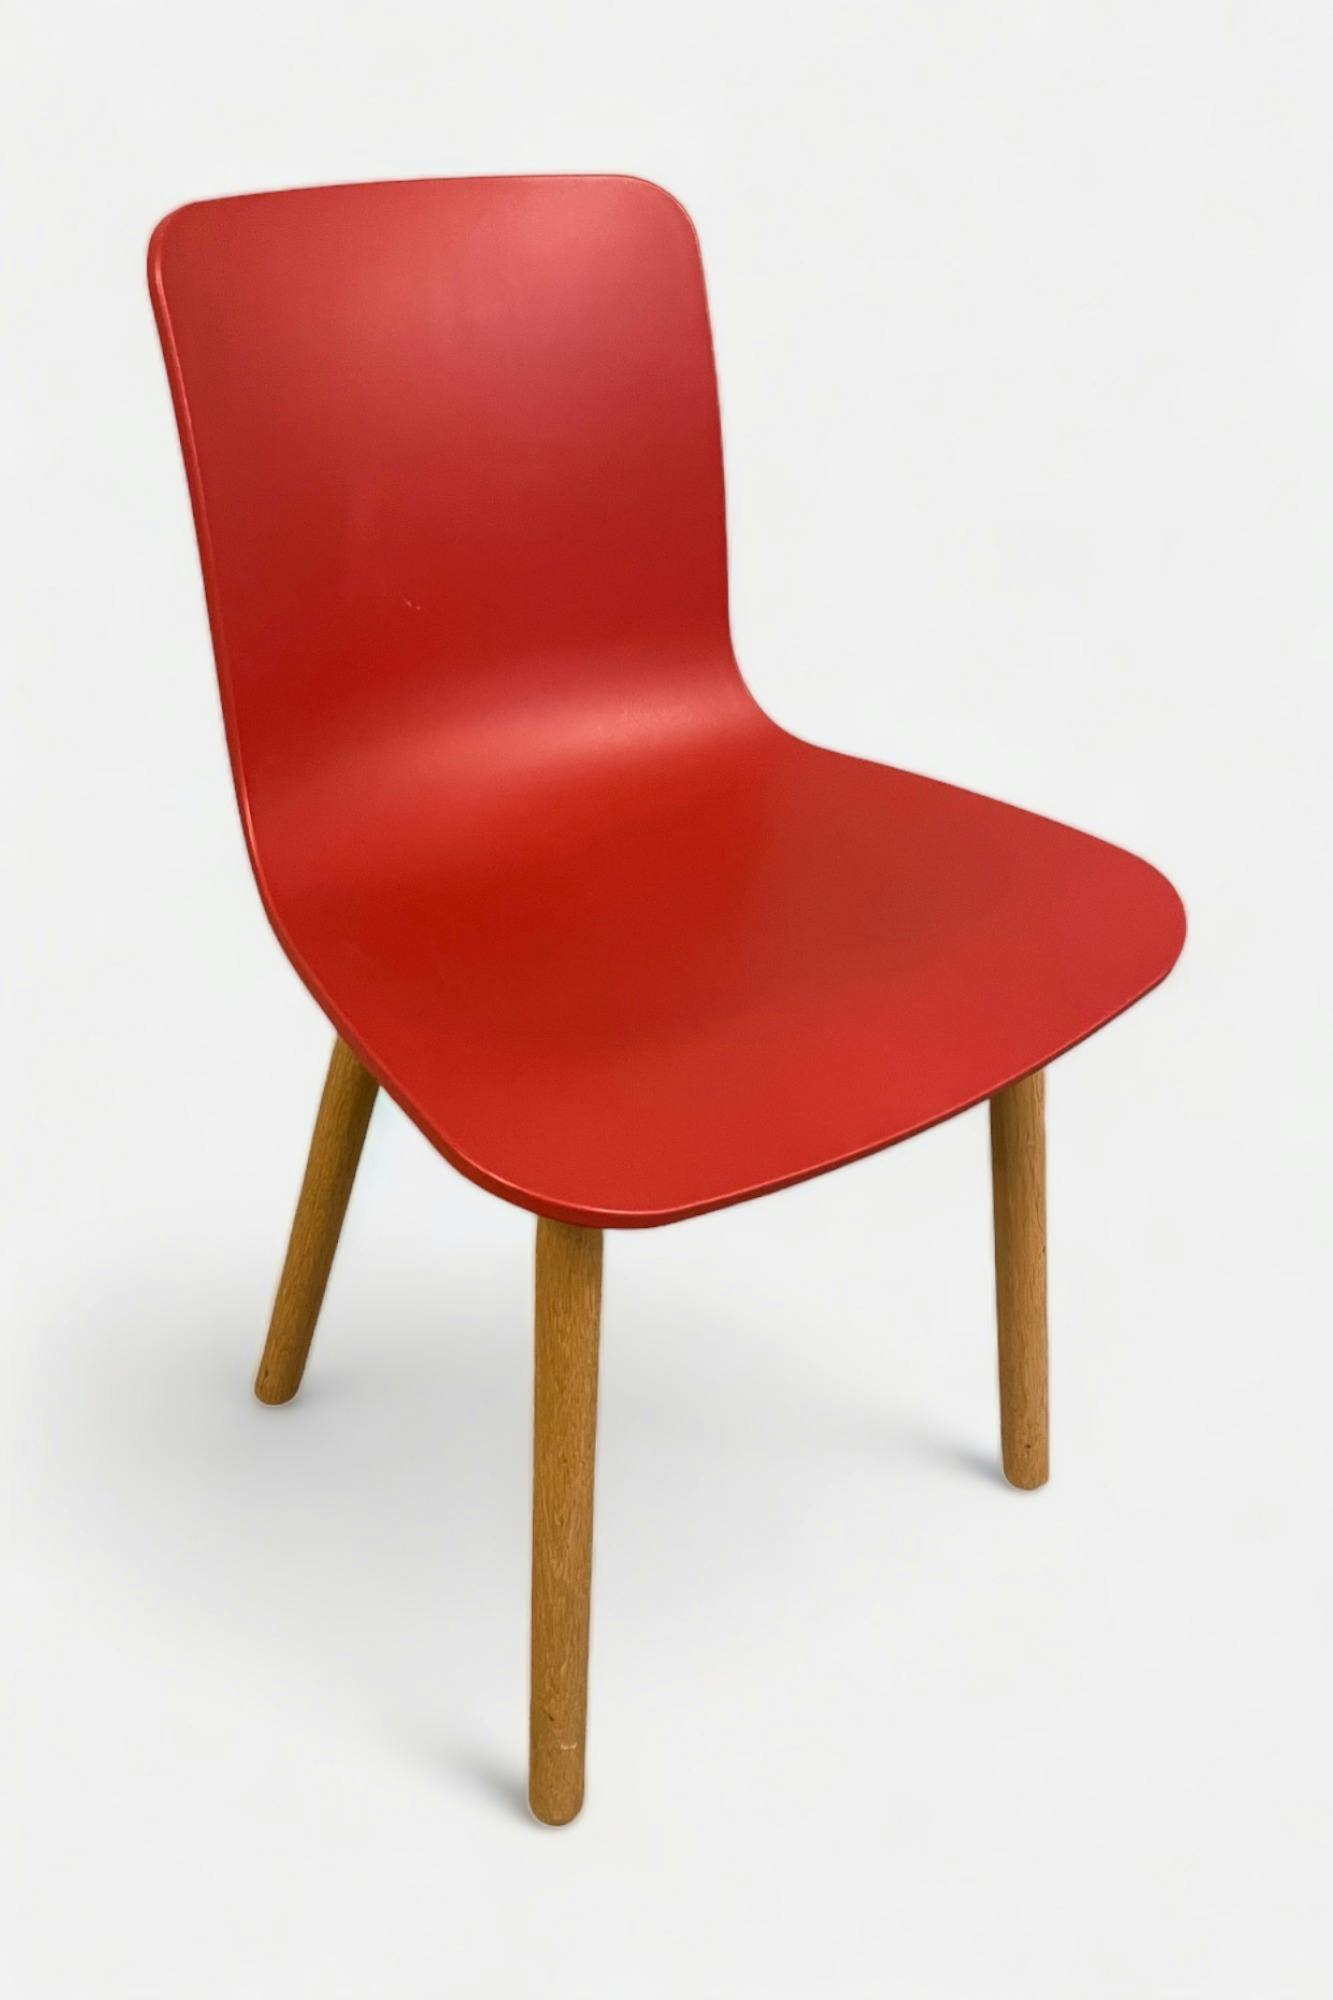 Vitra red / dark peach Nordic Style Chair on wood legs - Second hand quality "Chairs" - Relieve Furniture